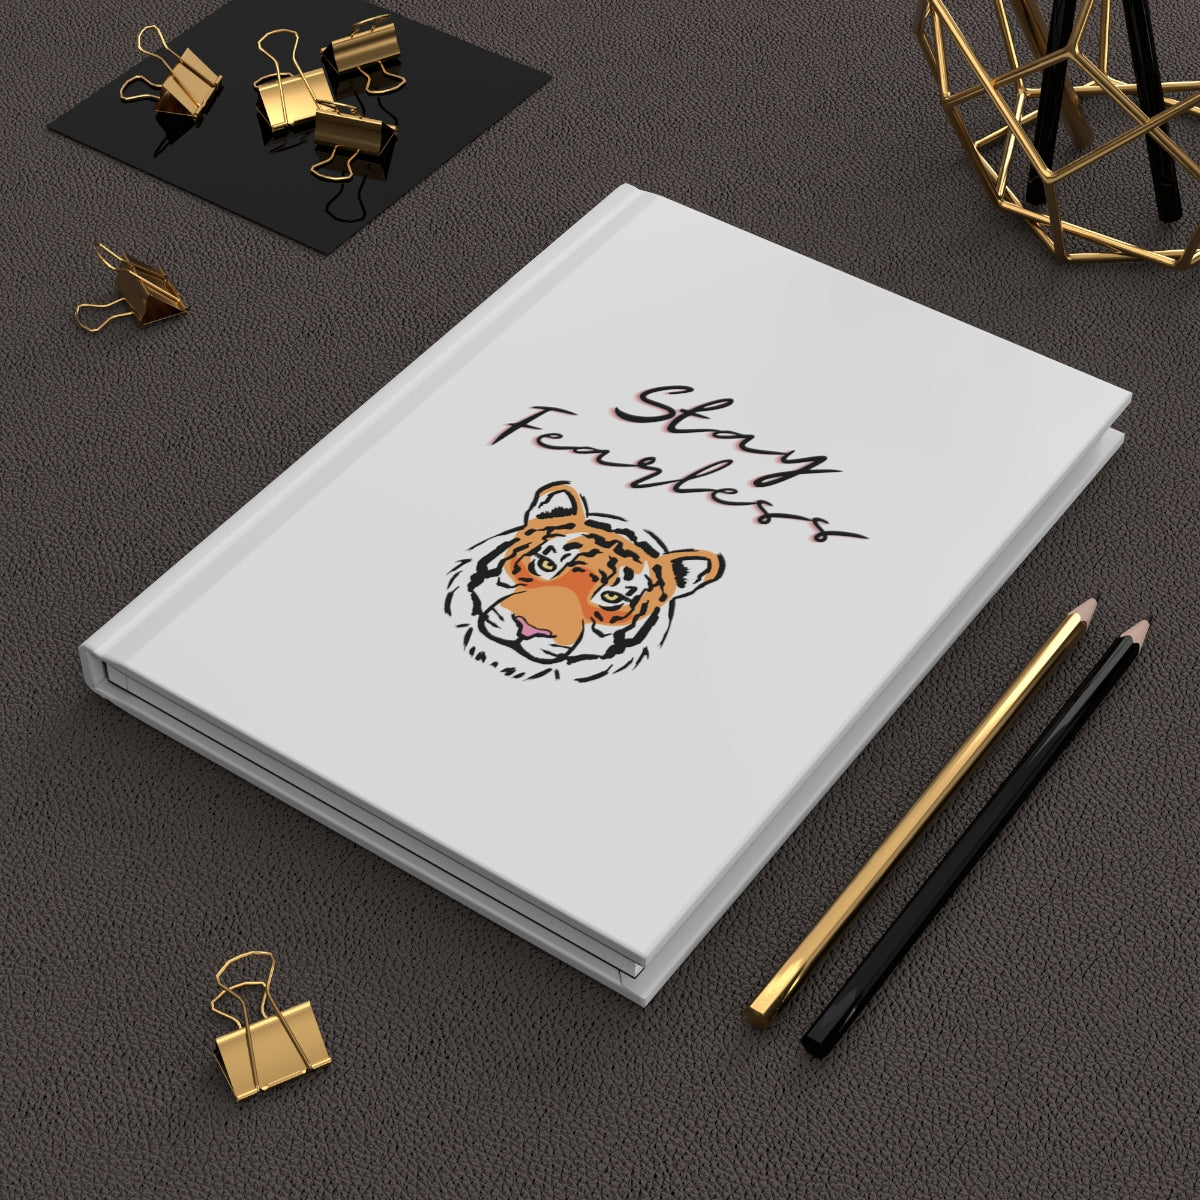 Hard cover notebook, Dotted Paper Journal, Stay Fearless Journal, Tiger, Lined Notebook, Lined Journal, Stationary, Empowerment Journal - The Good Life Vibe